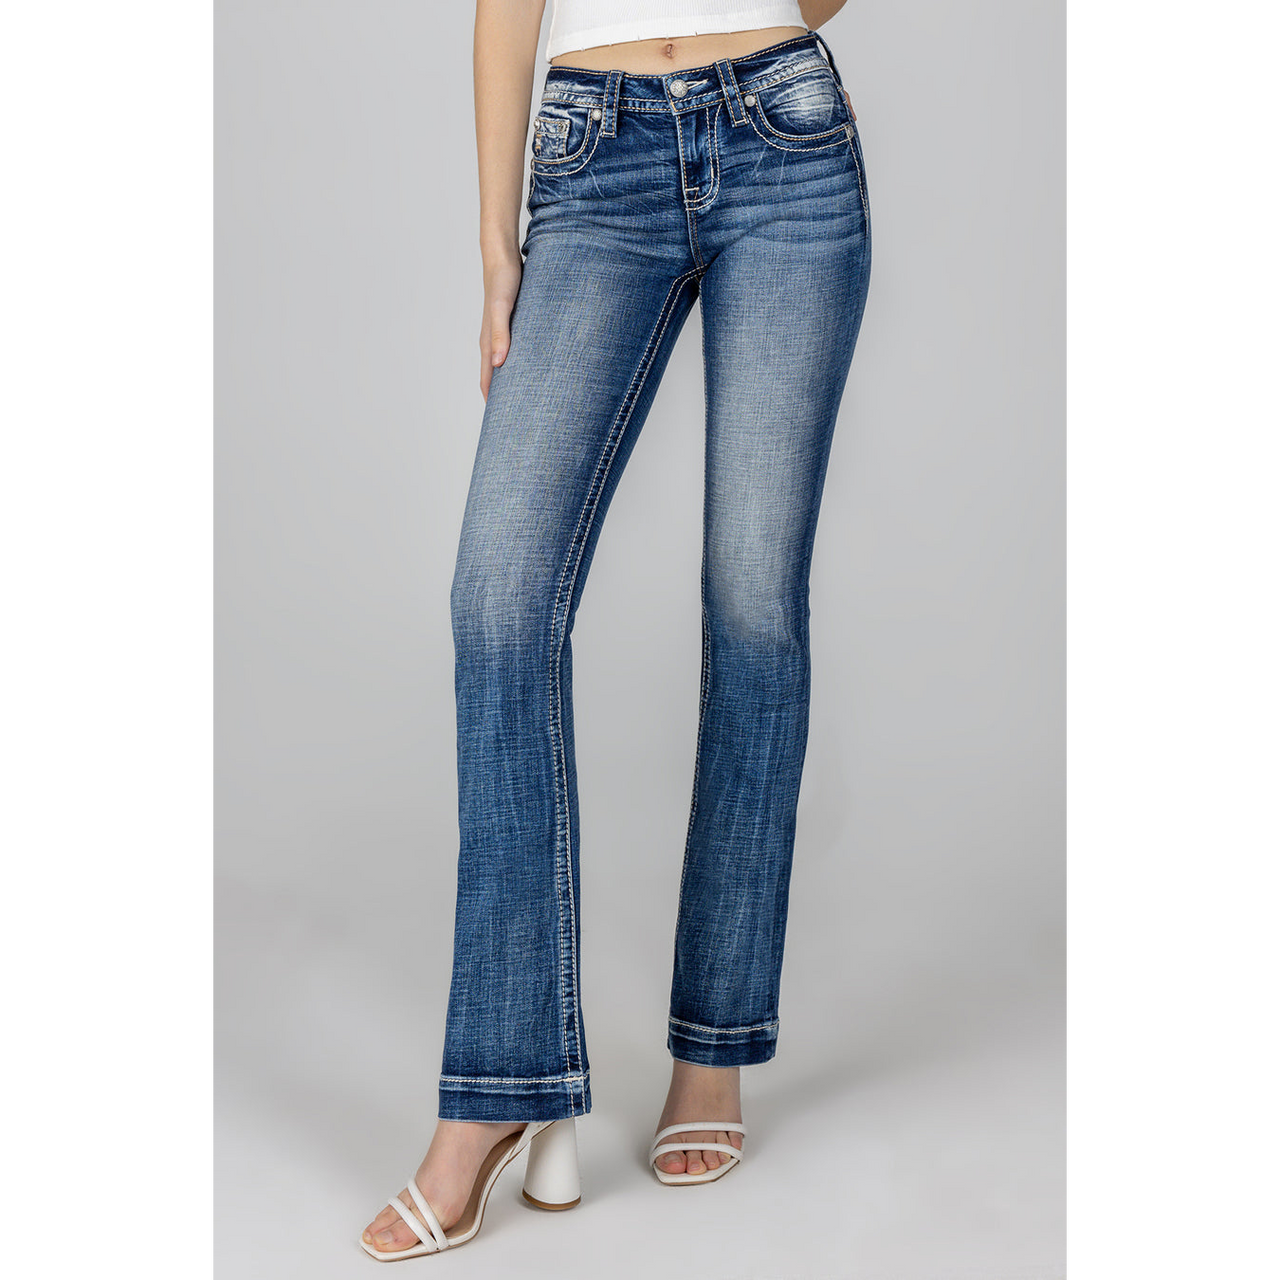 Miss Me Women's Pastel Angel Wing Mid Rise Bootcut Jeans - Blue